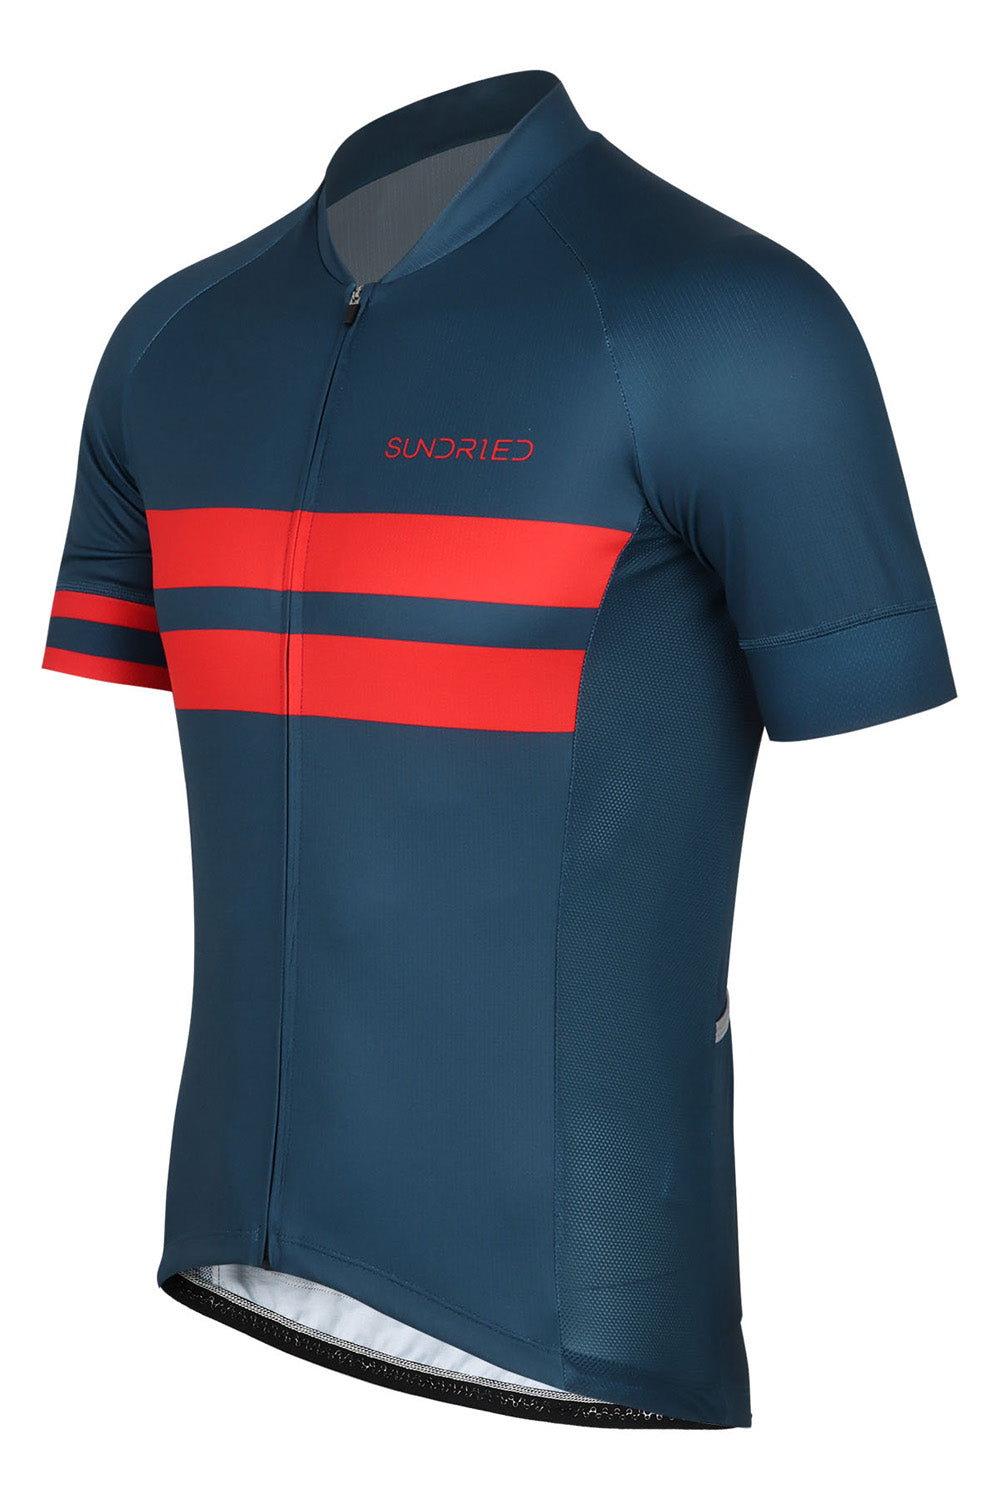 Sundried Endo Men's Cycle Jersey Short Sleeve Jersey Activewear